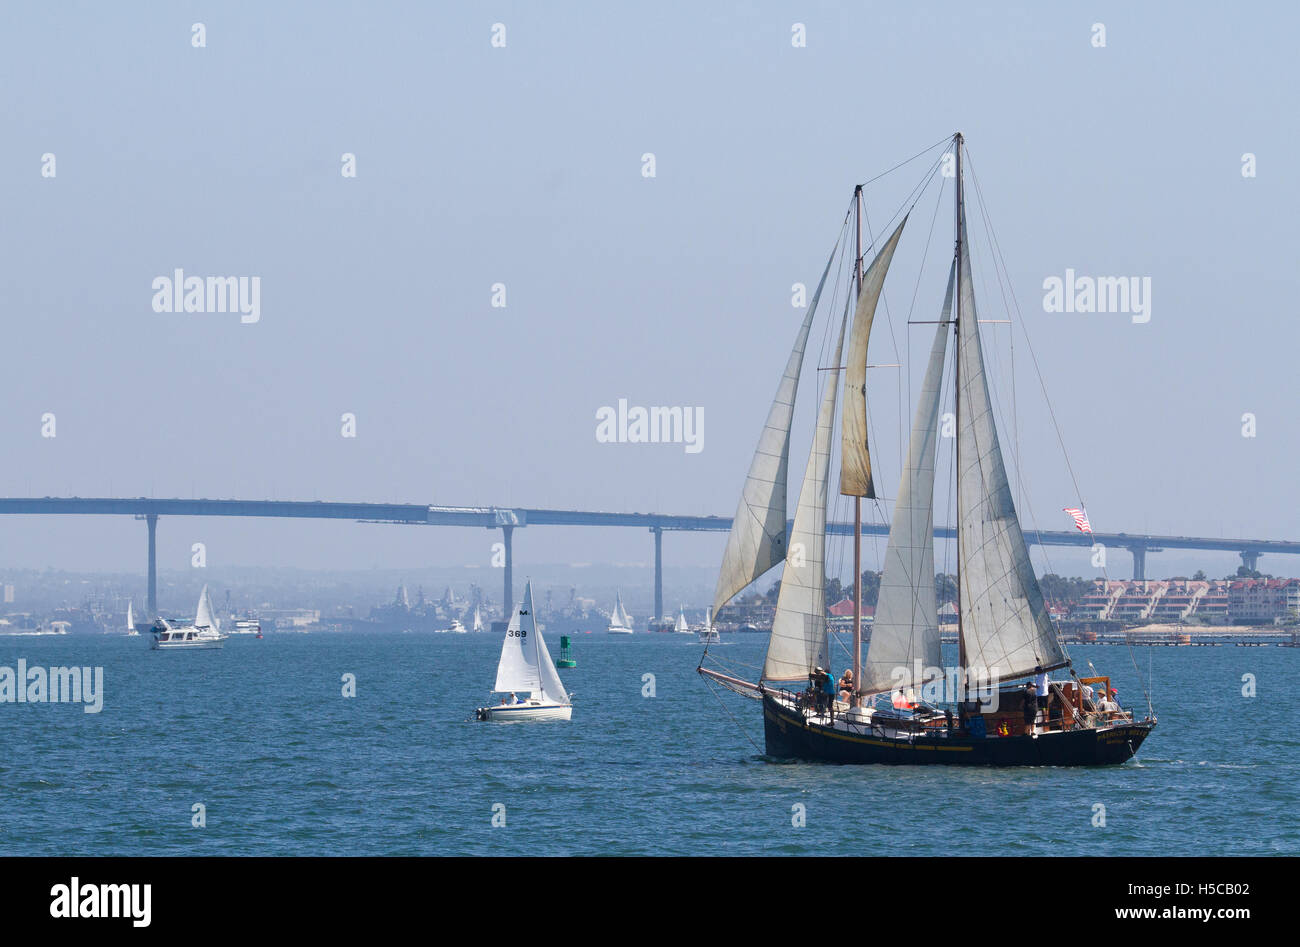 Tall ship Patricia Belle in 2016 Festival of Sail, Parade of Ships, San Diego Bay, CA with Coronado Bridge in background Stock Photo